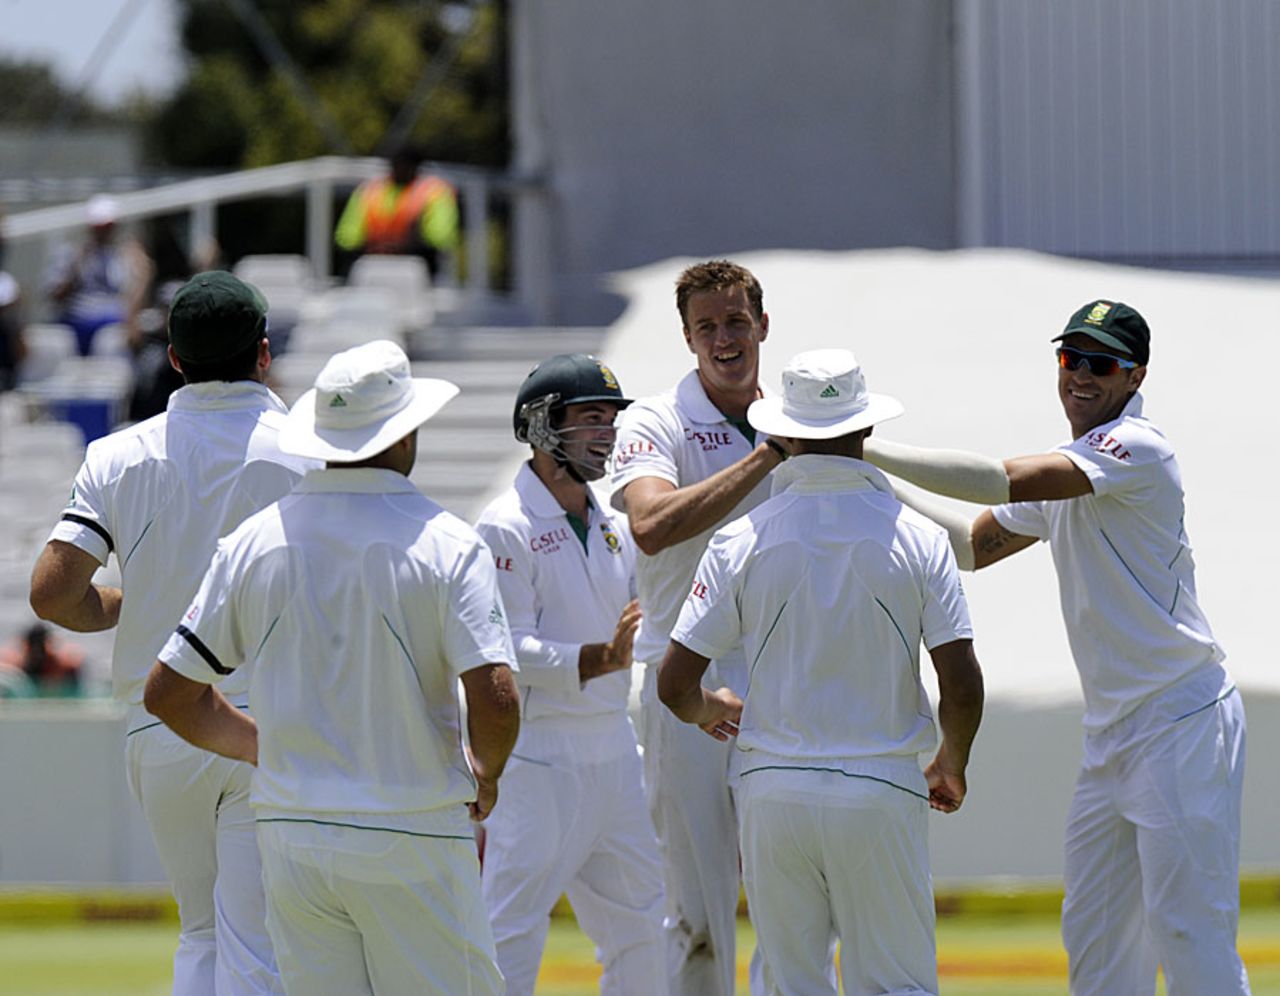 South Africans celebrate Dean Brownlie's dismissal, South Africa v New Zealand, 1st Test, Cape Town, January 4, 2013